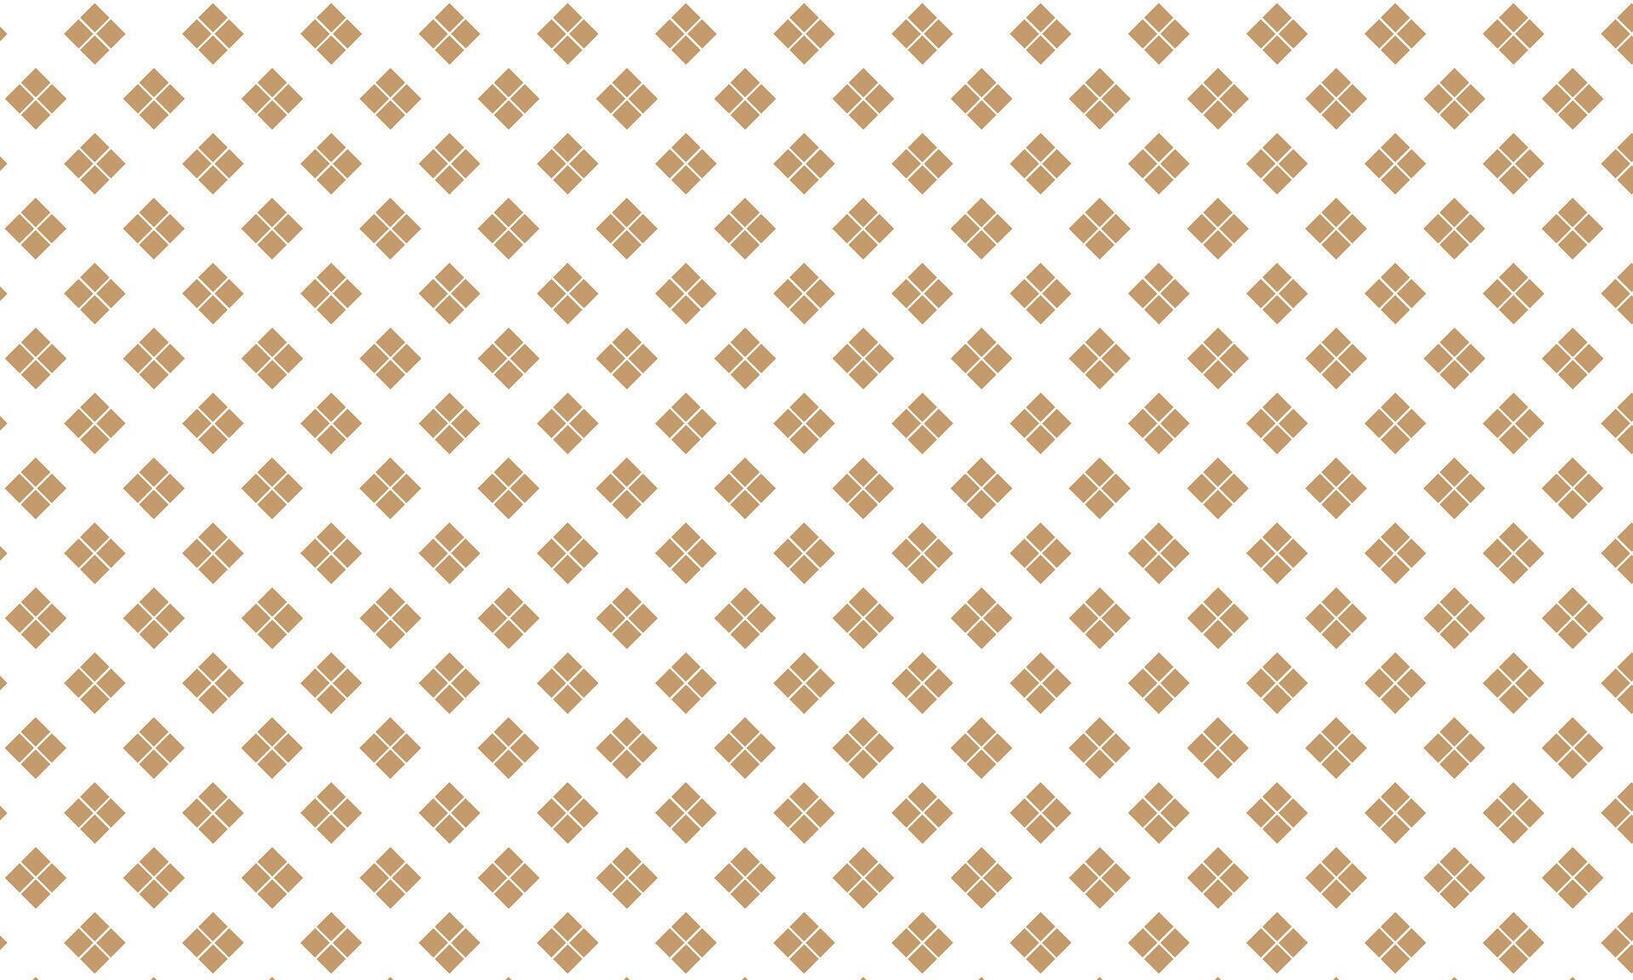 abstract geometric pattern vector. vector